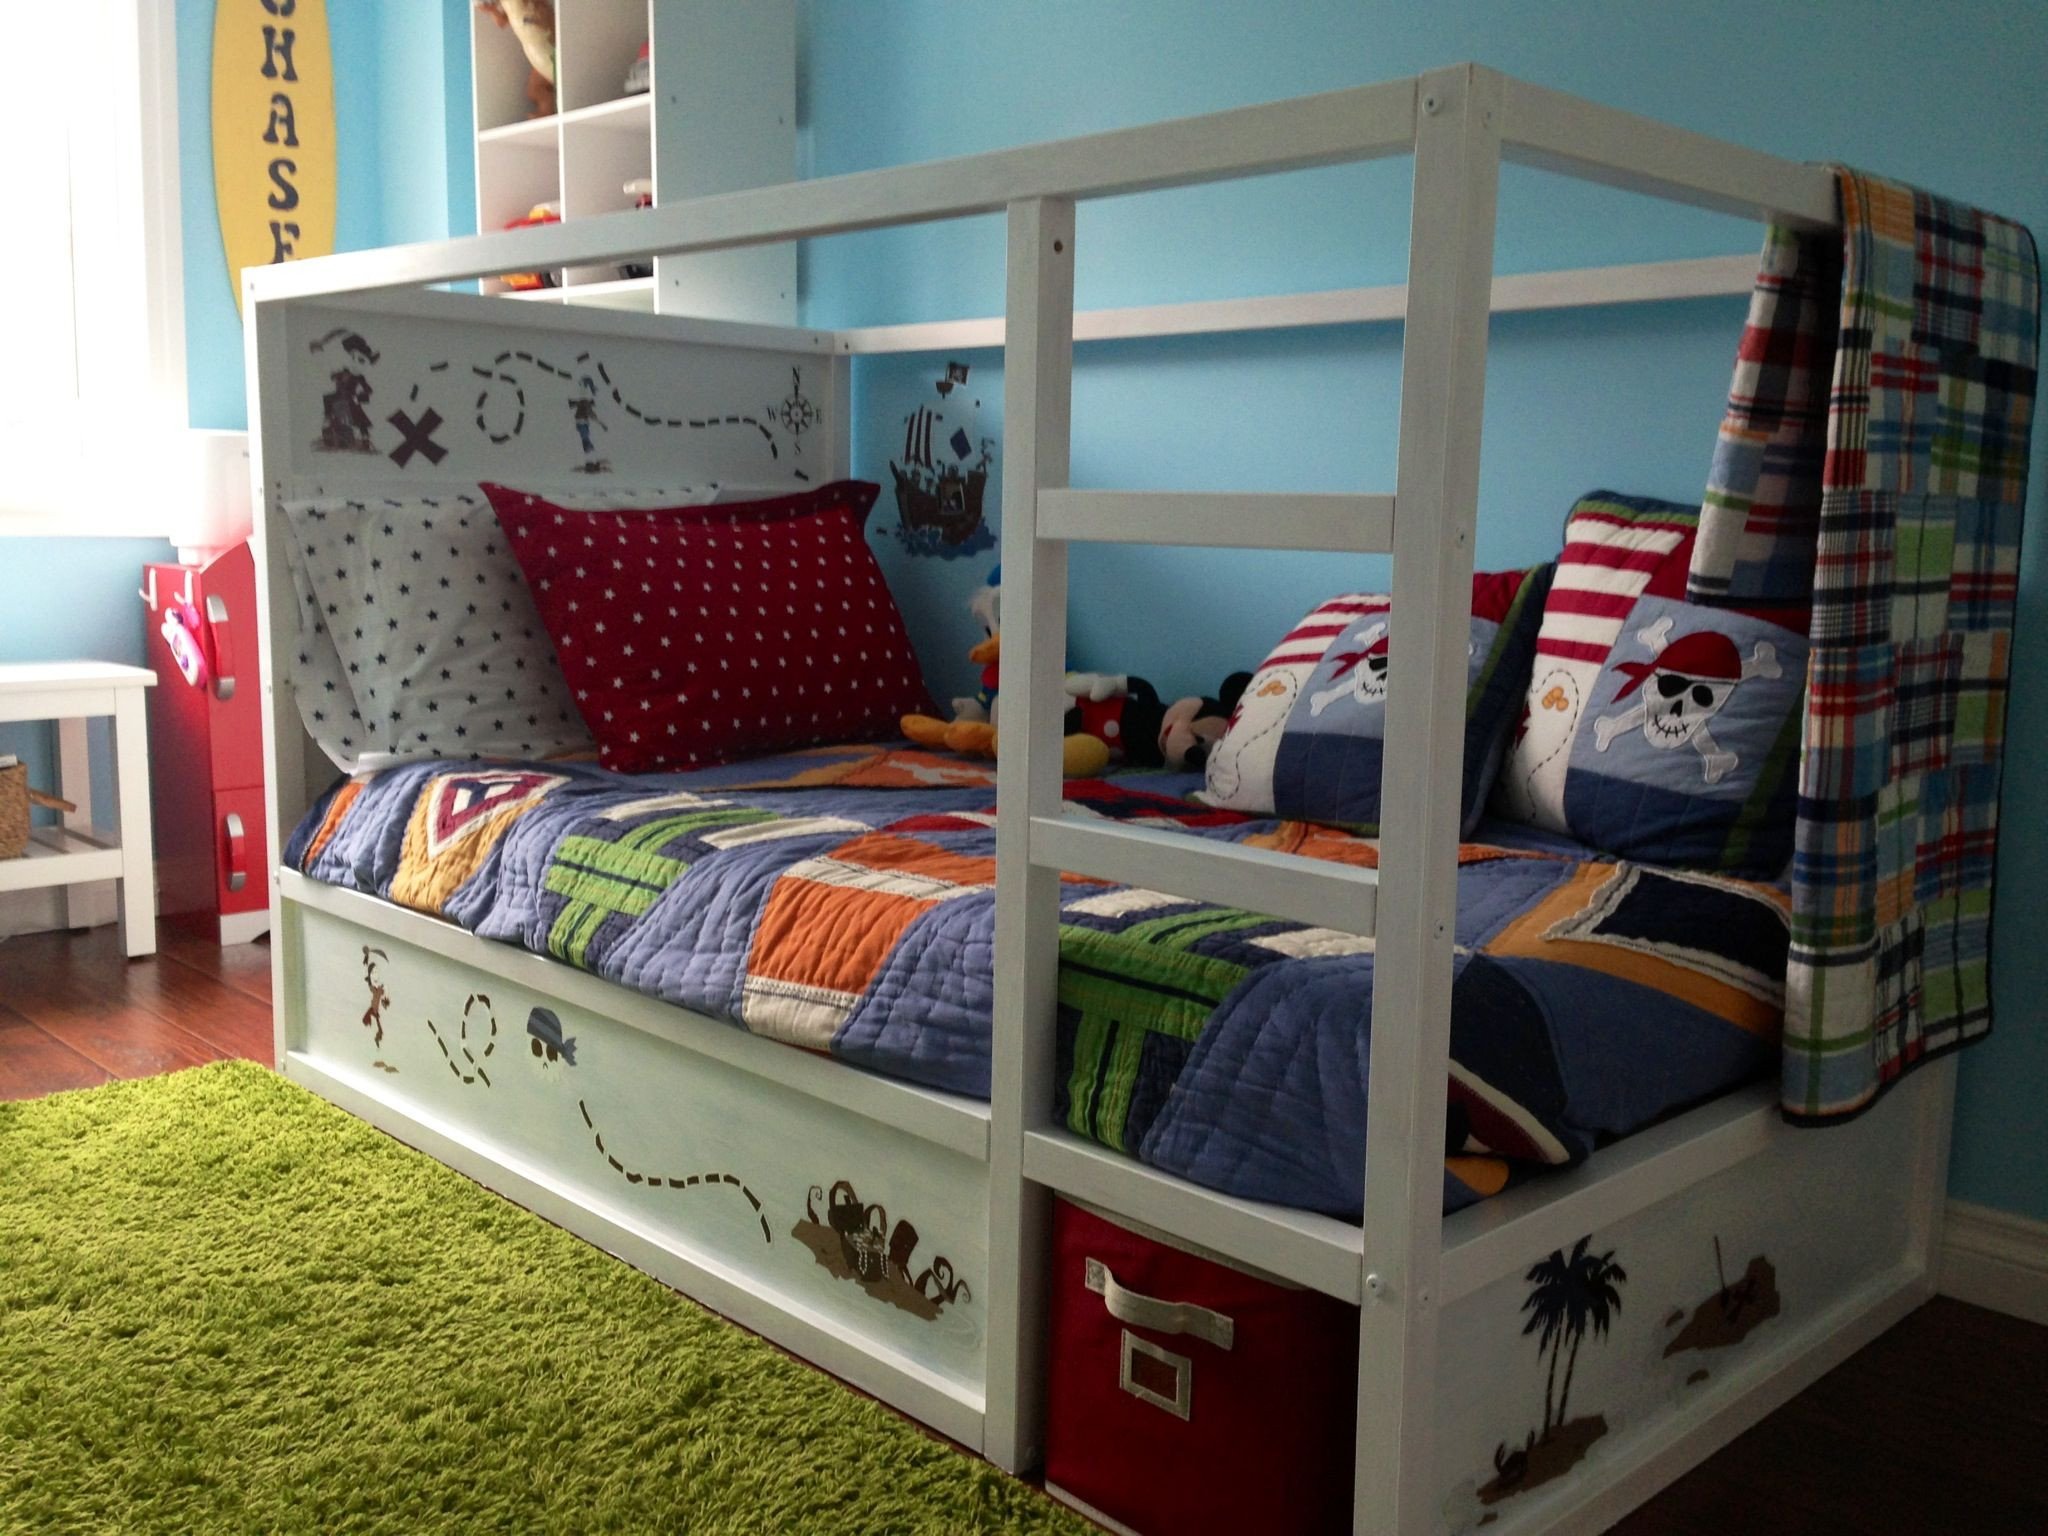 Loft Bed Bedroom Ideas Best Of Ikea Bunk Bed Made Into A Pirate Ship